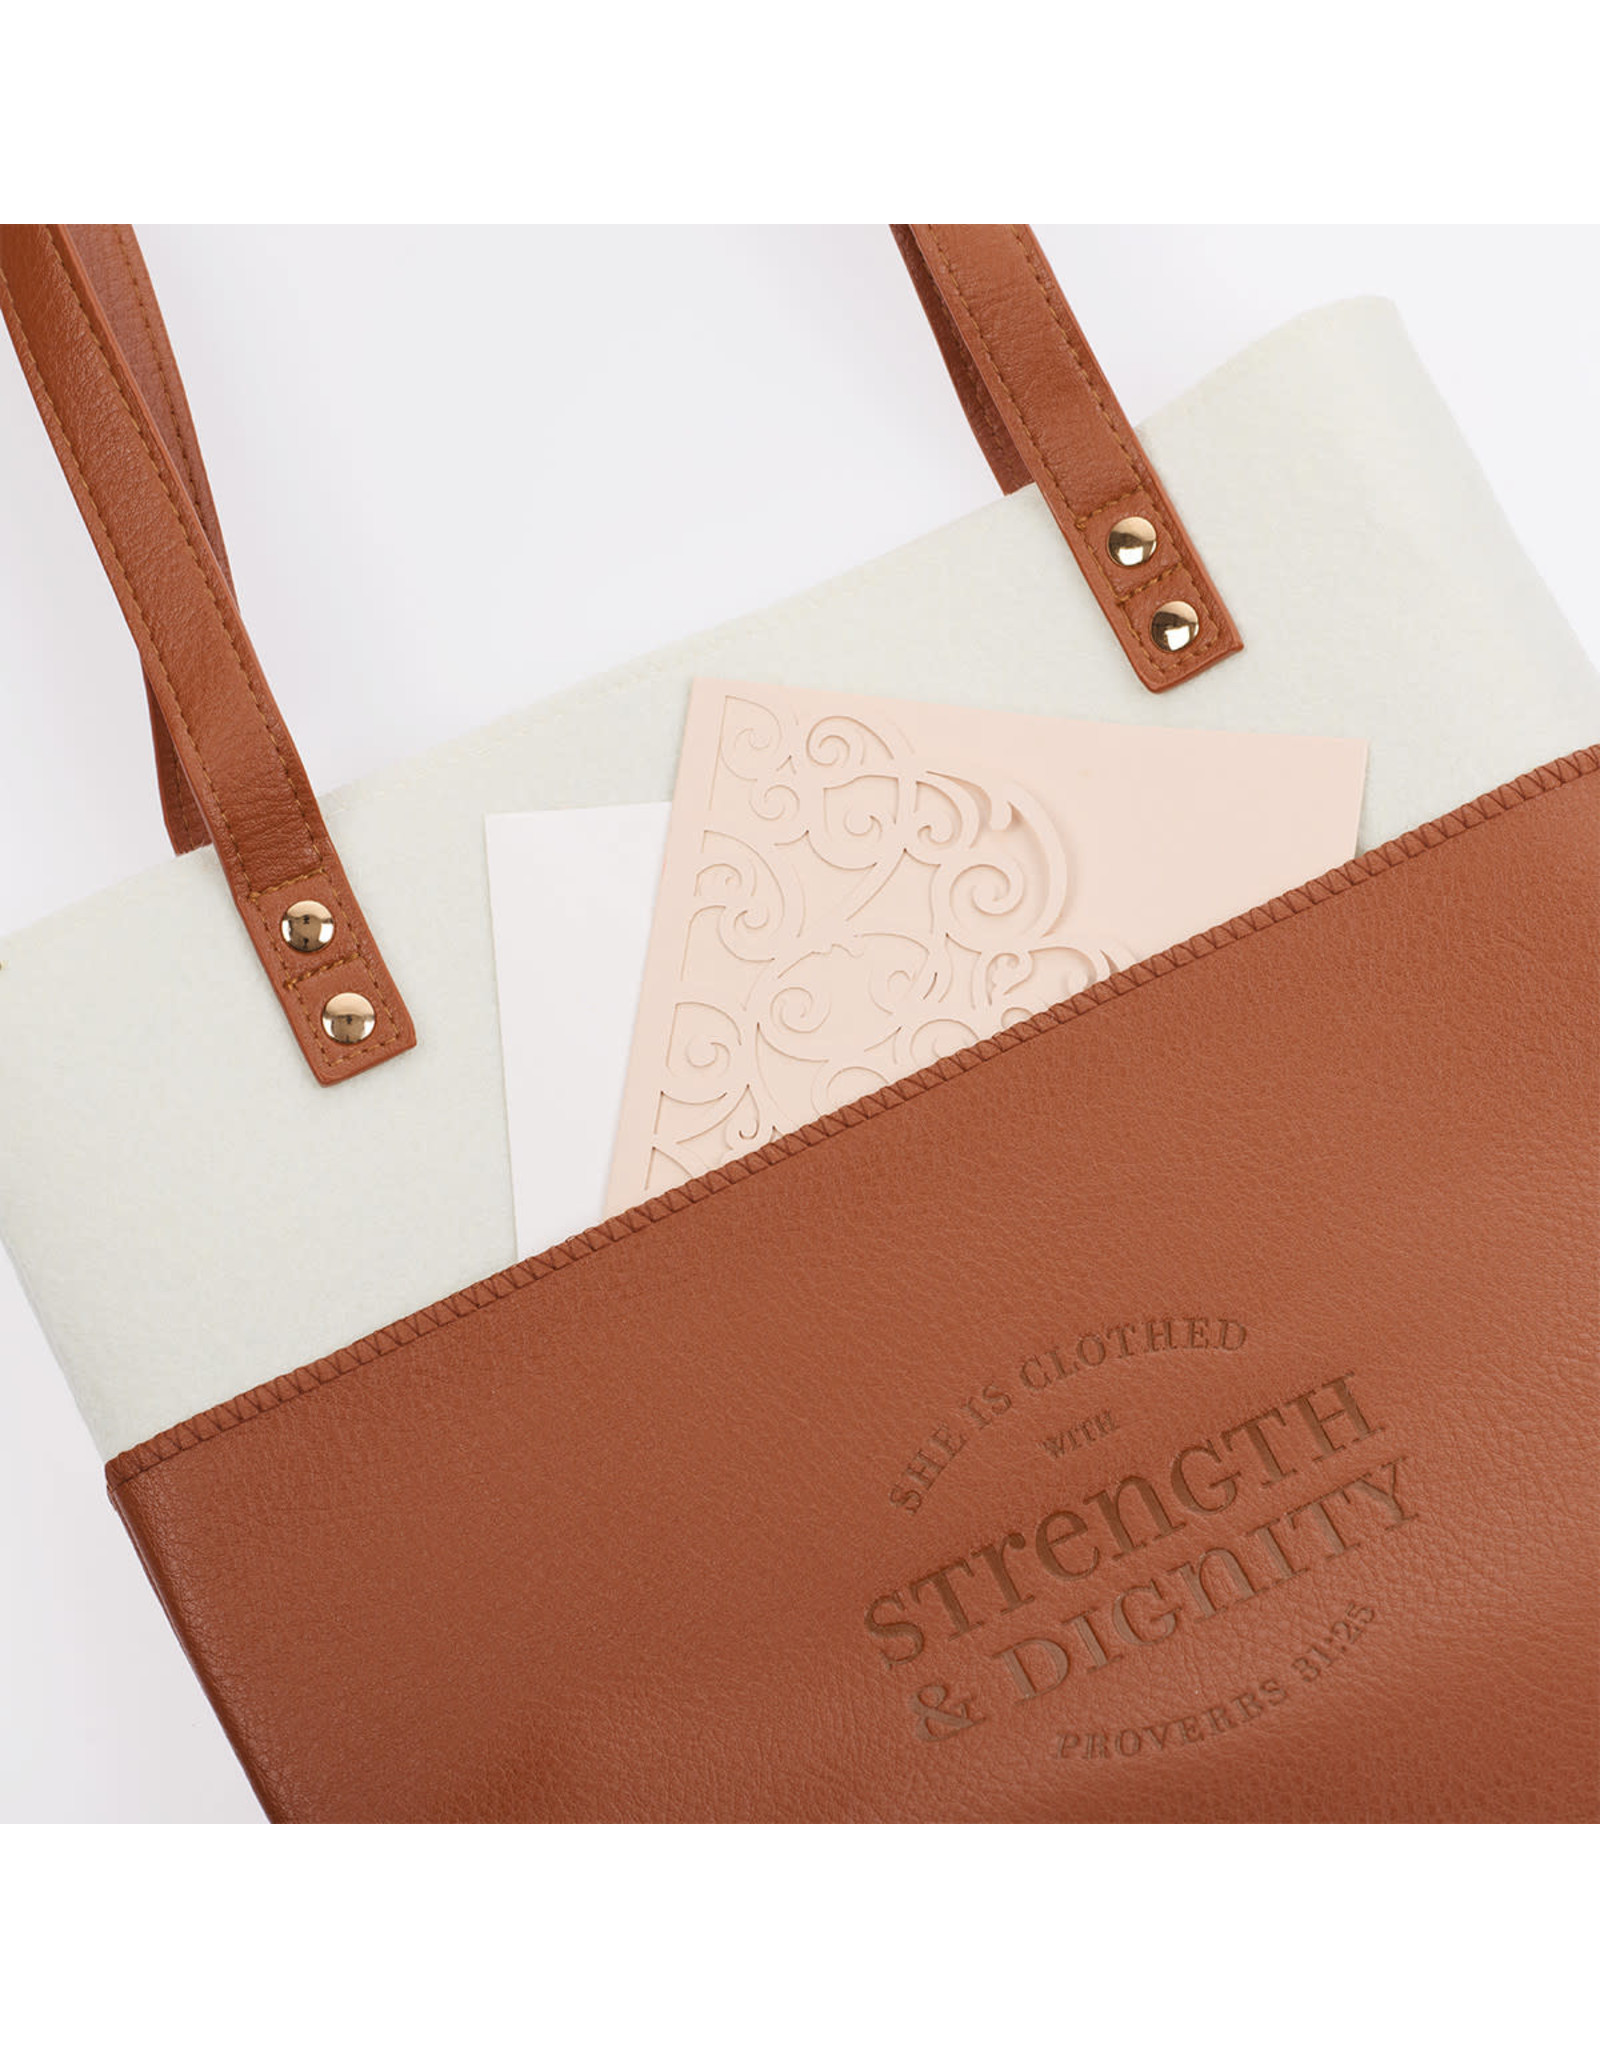 Tote Bag Purse - Strength & Dignity, Toffee & Cream  (Proverbs 31:25)